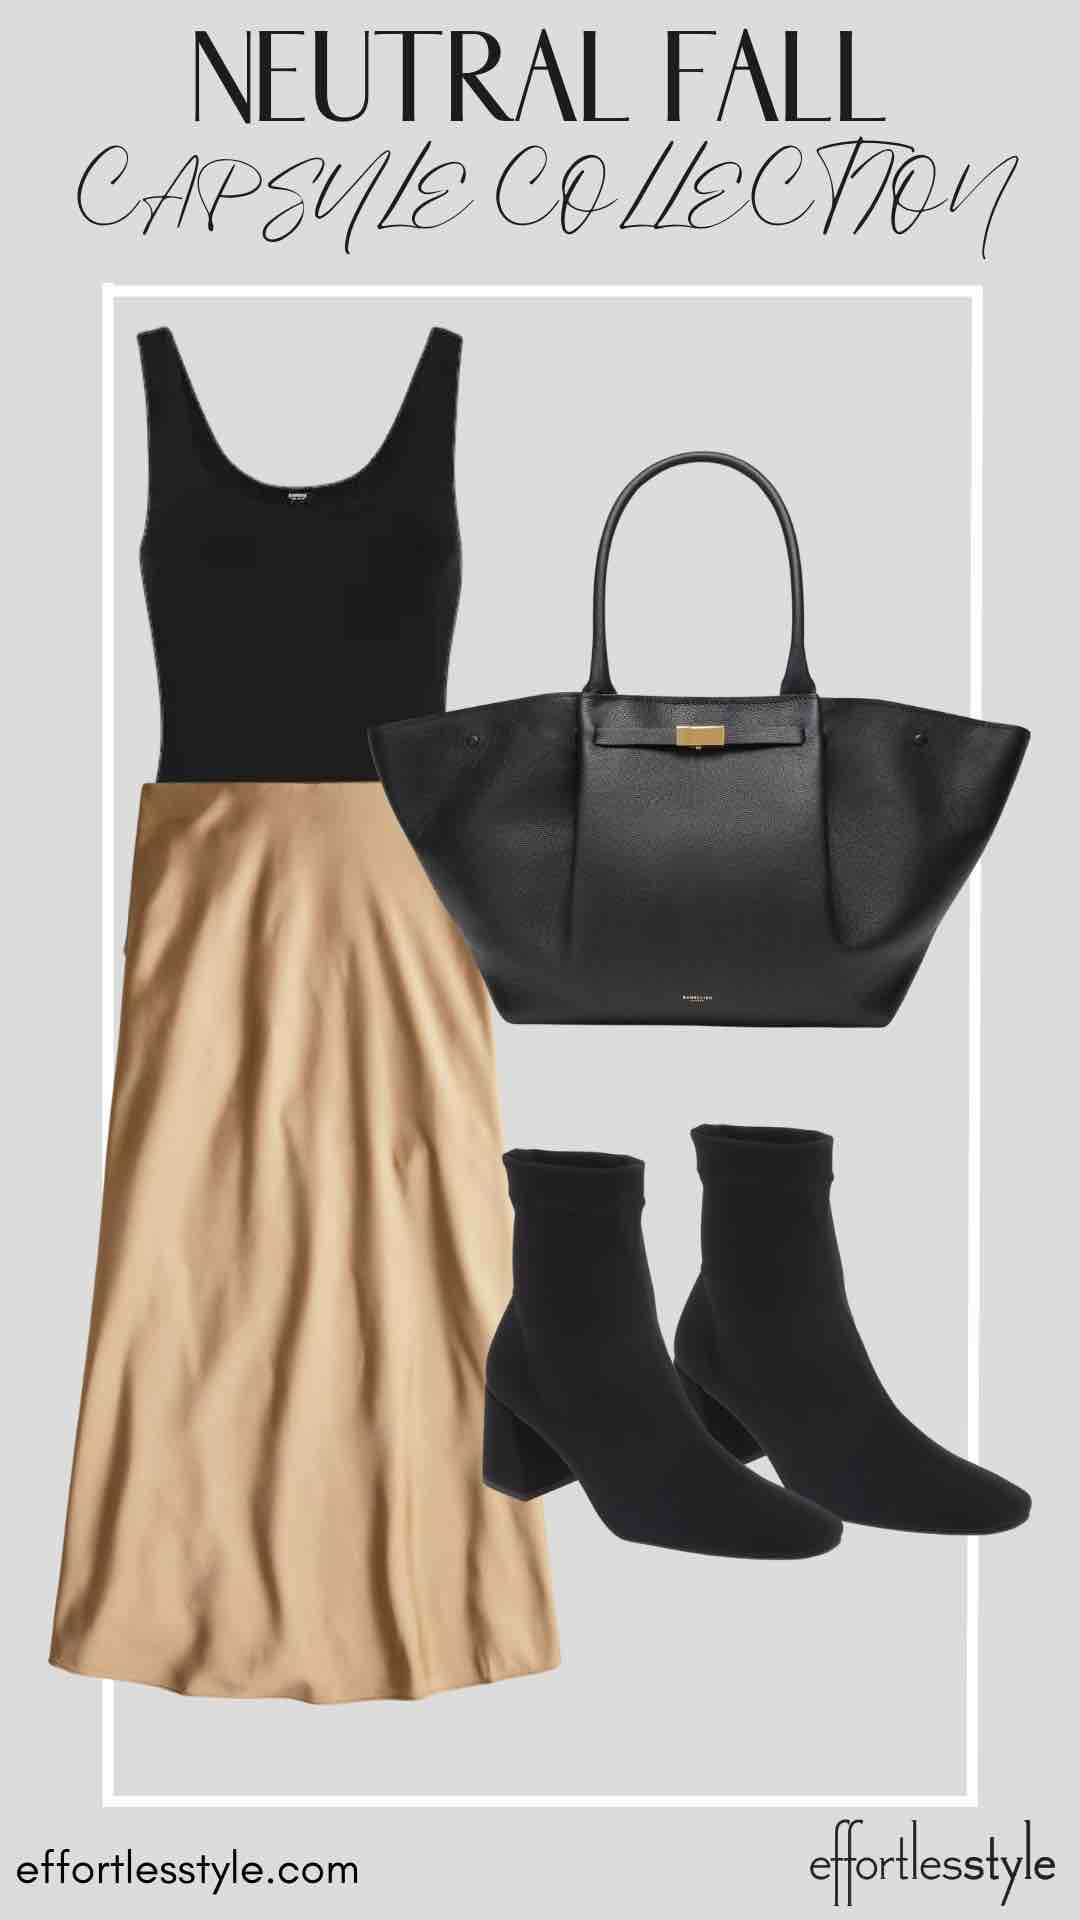 How To Wear Our Neutral Fall Capsule Wardrobe - Part 2 Bodysuit & Slip Skirt date night style inspiration how to style. slip skirt for a fun night out how to wear sock booties with a slip skirt how to style your sock booties how to wear black and camel together